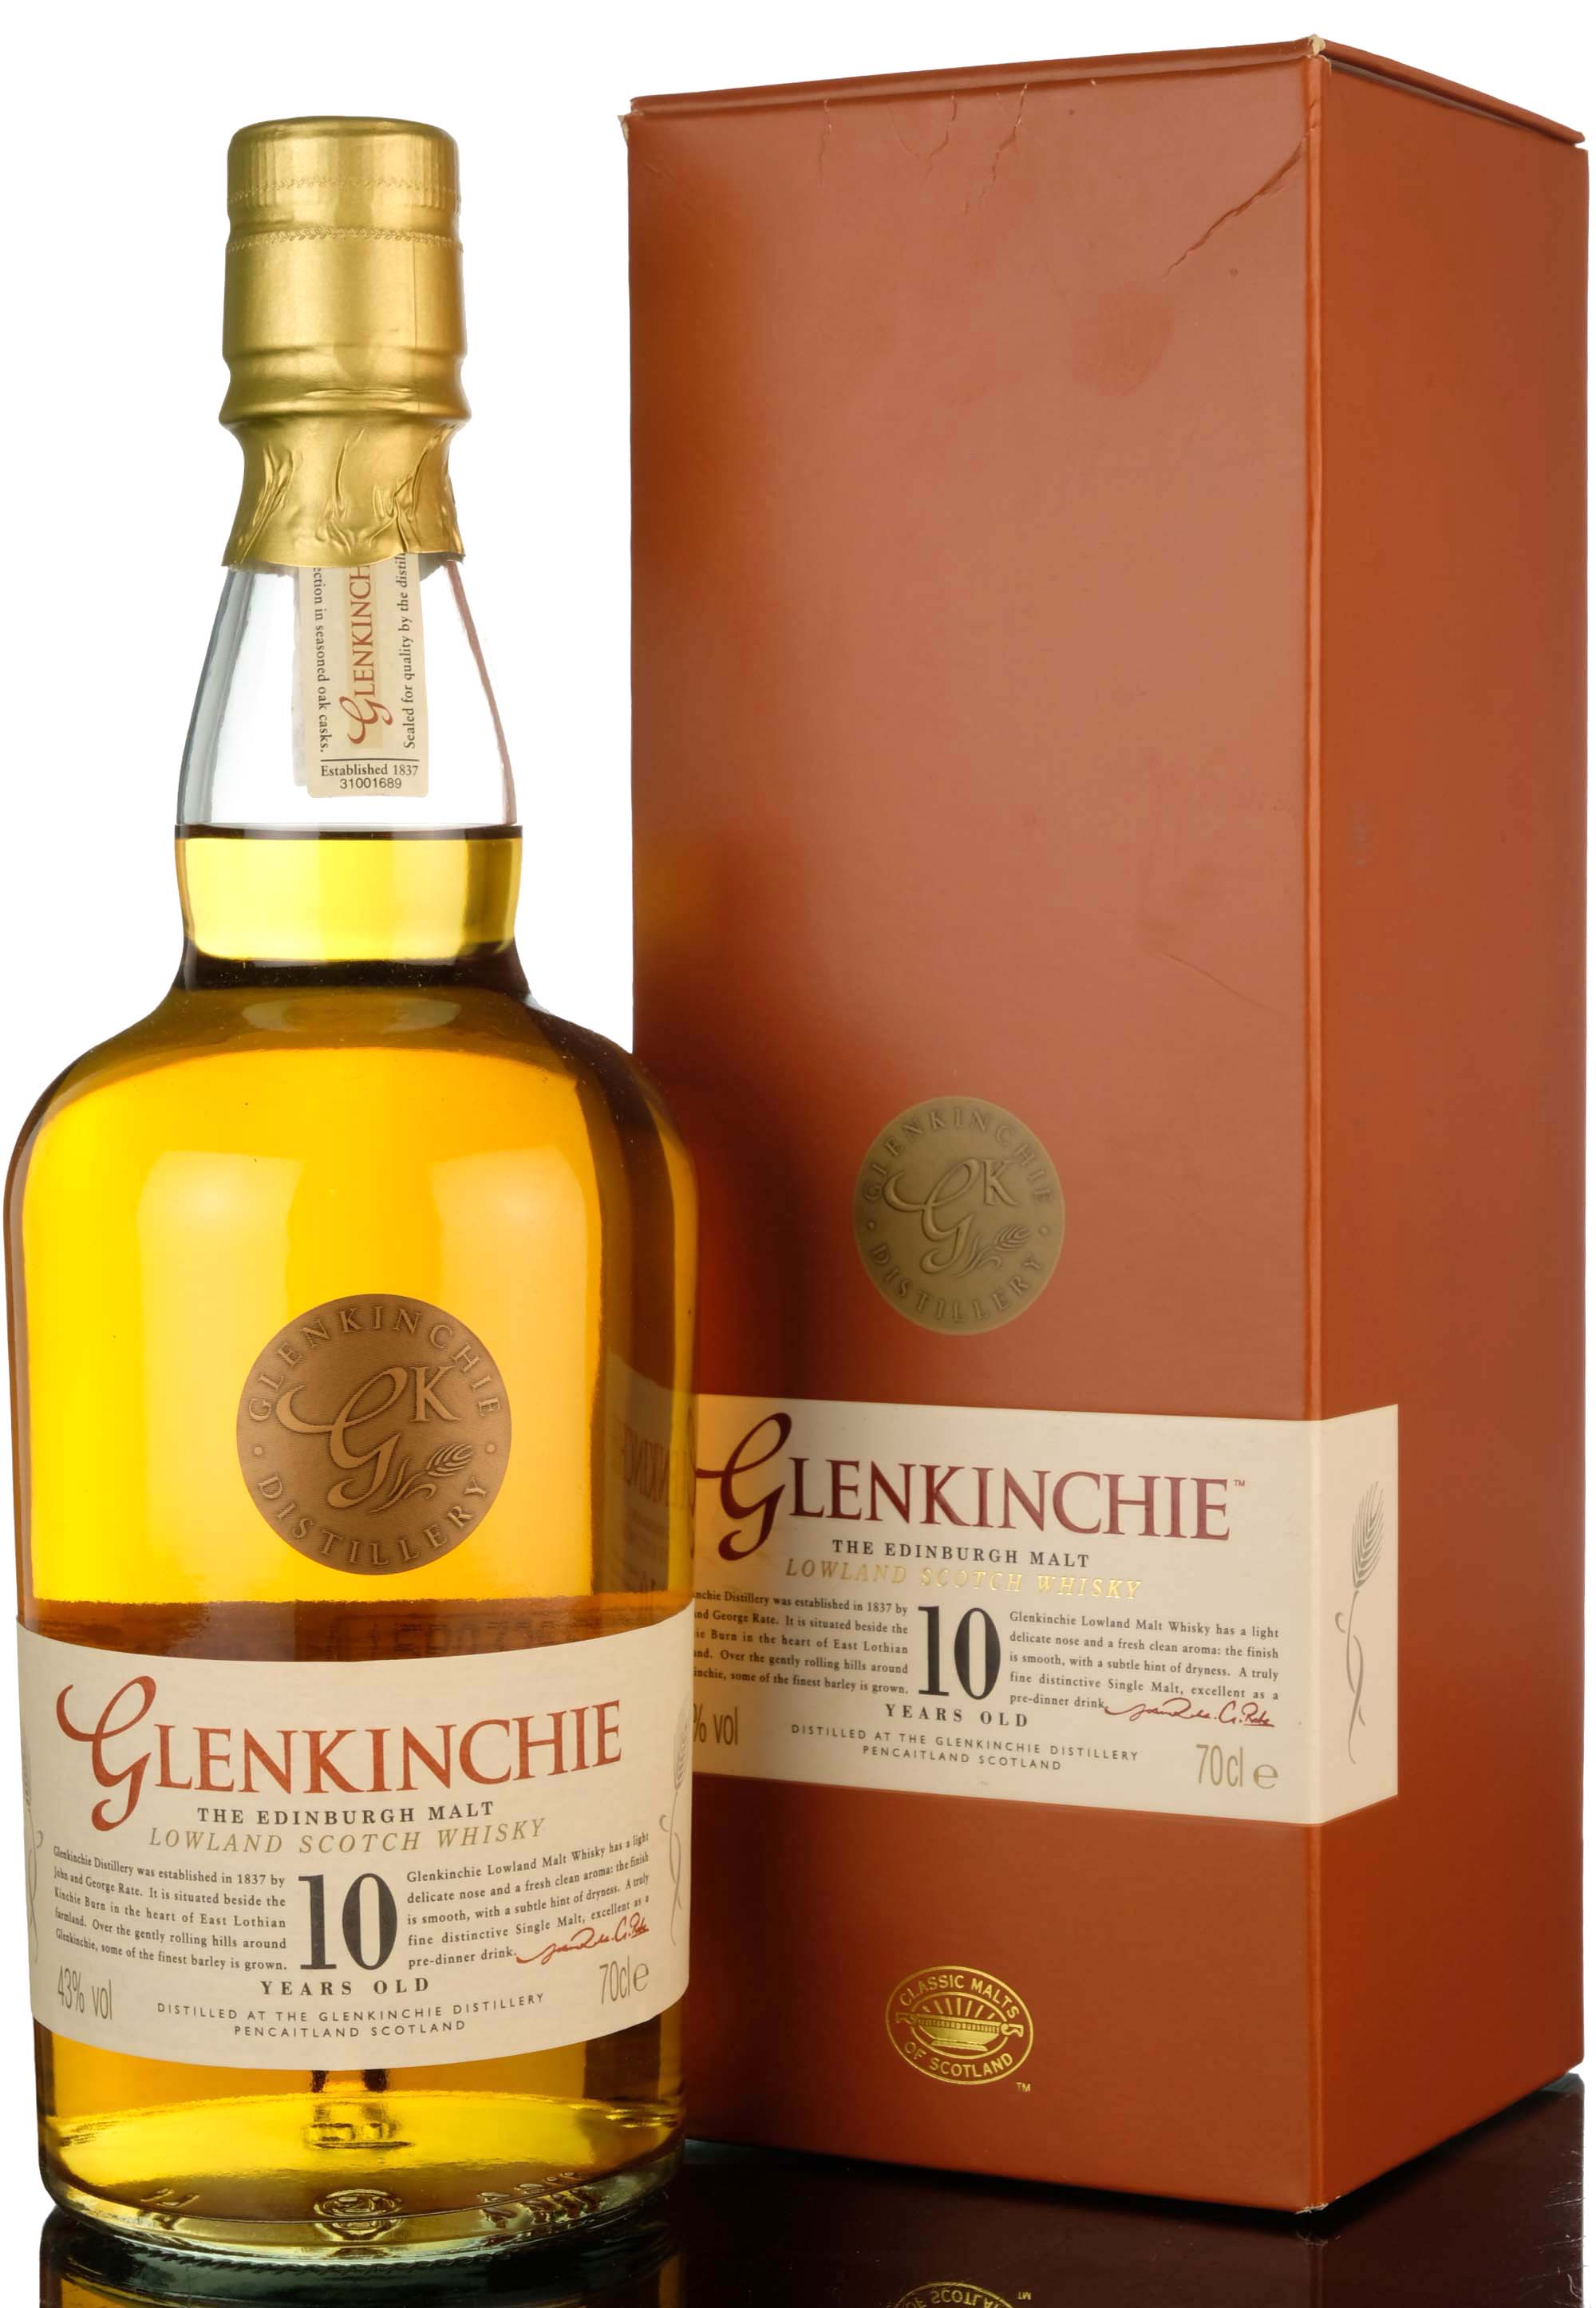 Glenkinchie 10 Year Old - Early 2000s